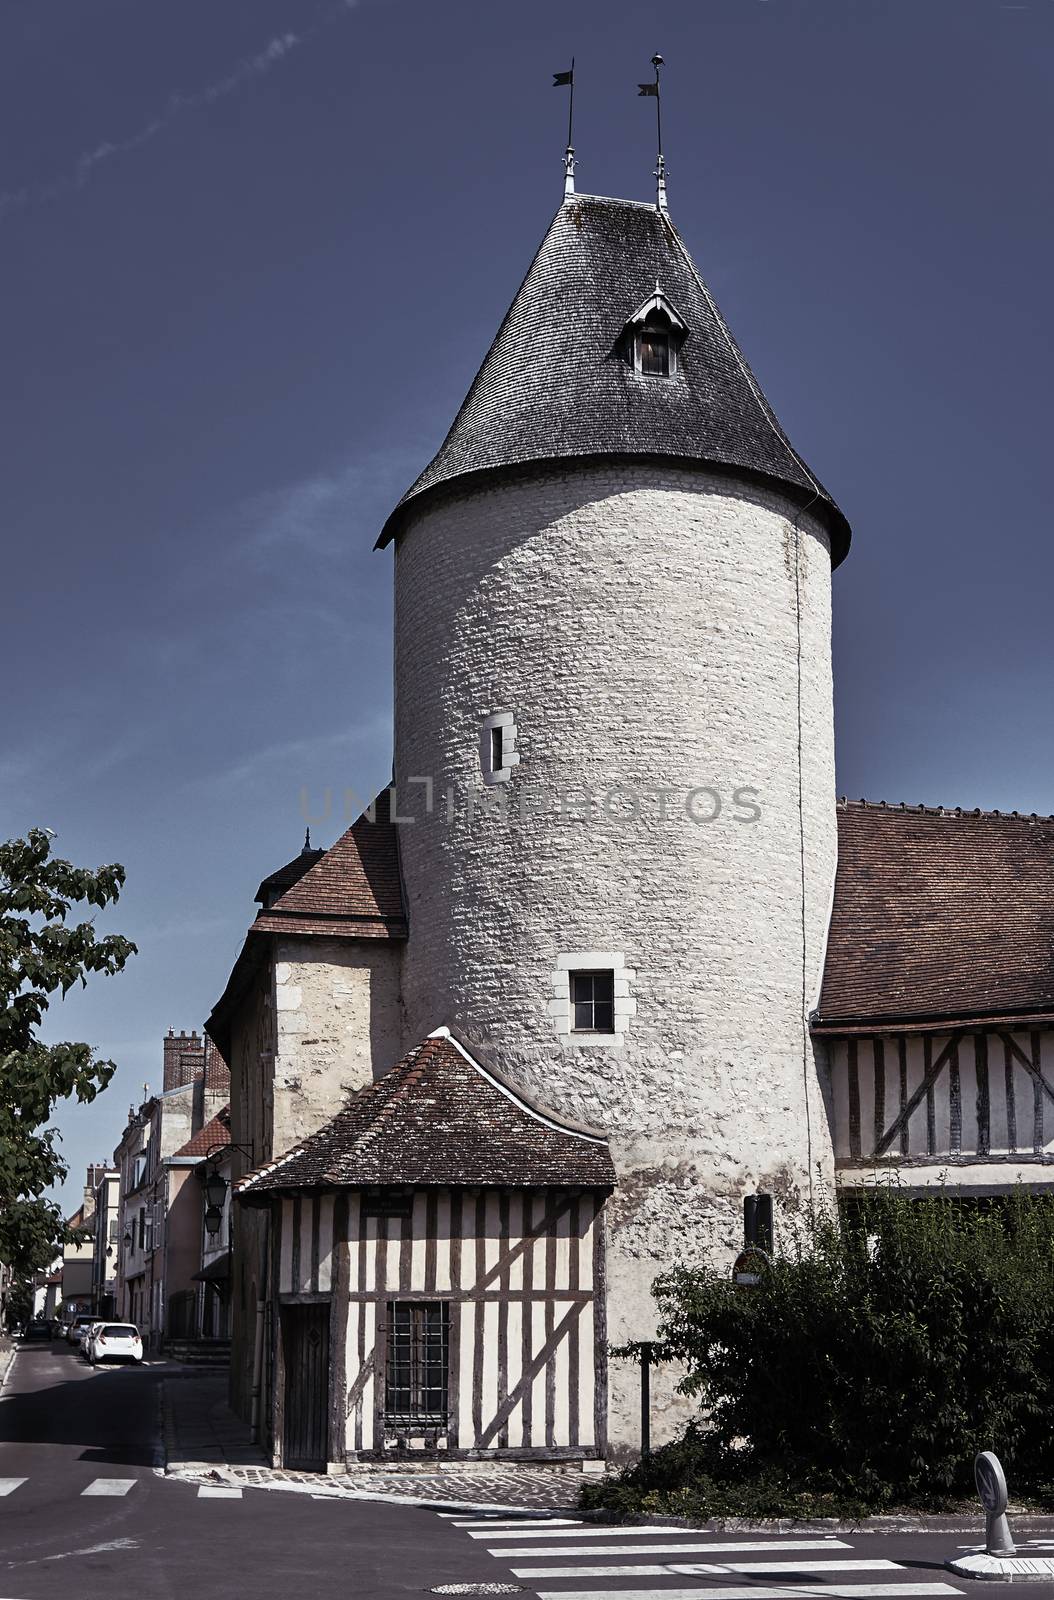 Wall and tower in the old town of Troyes, France